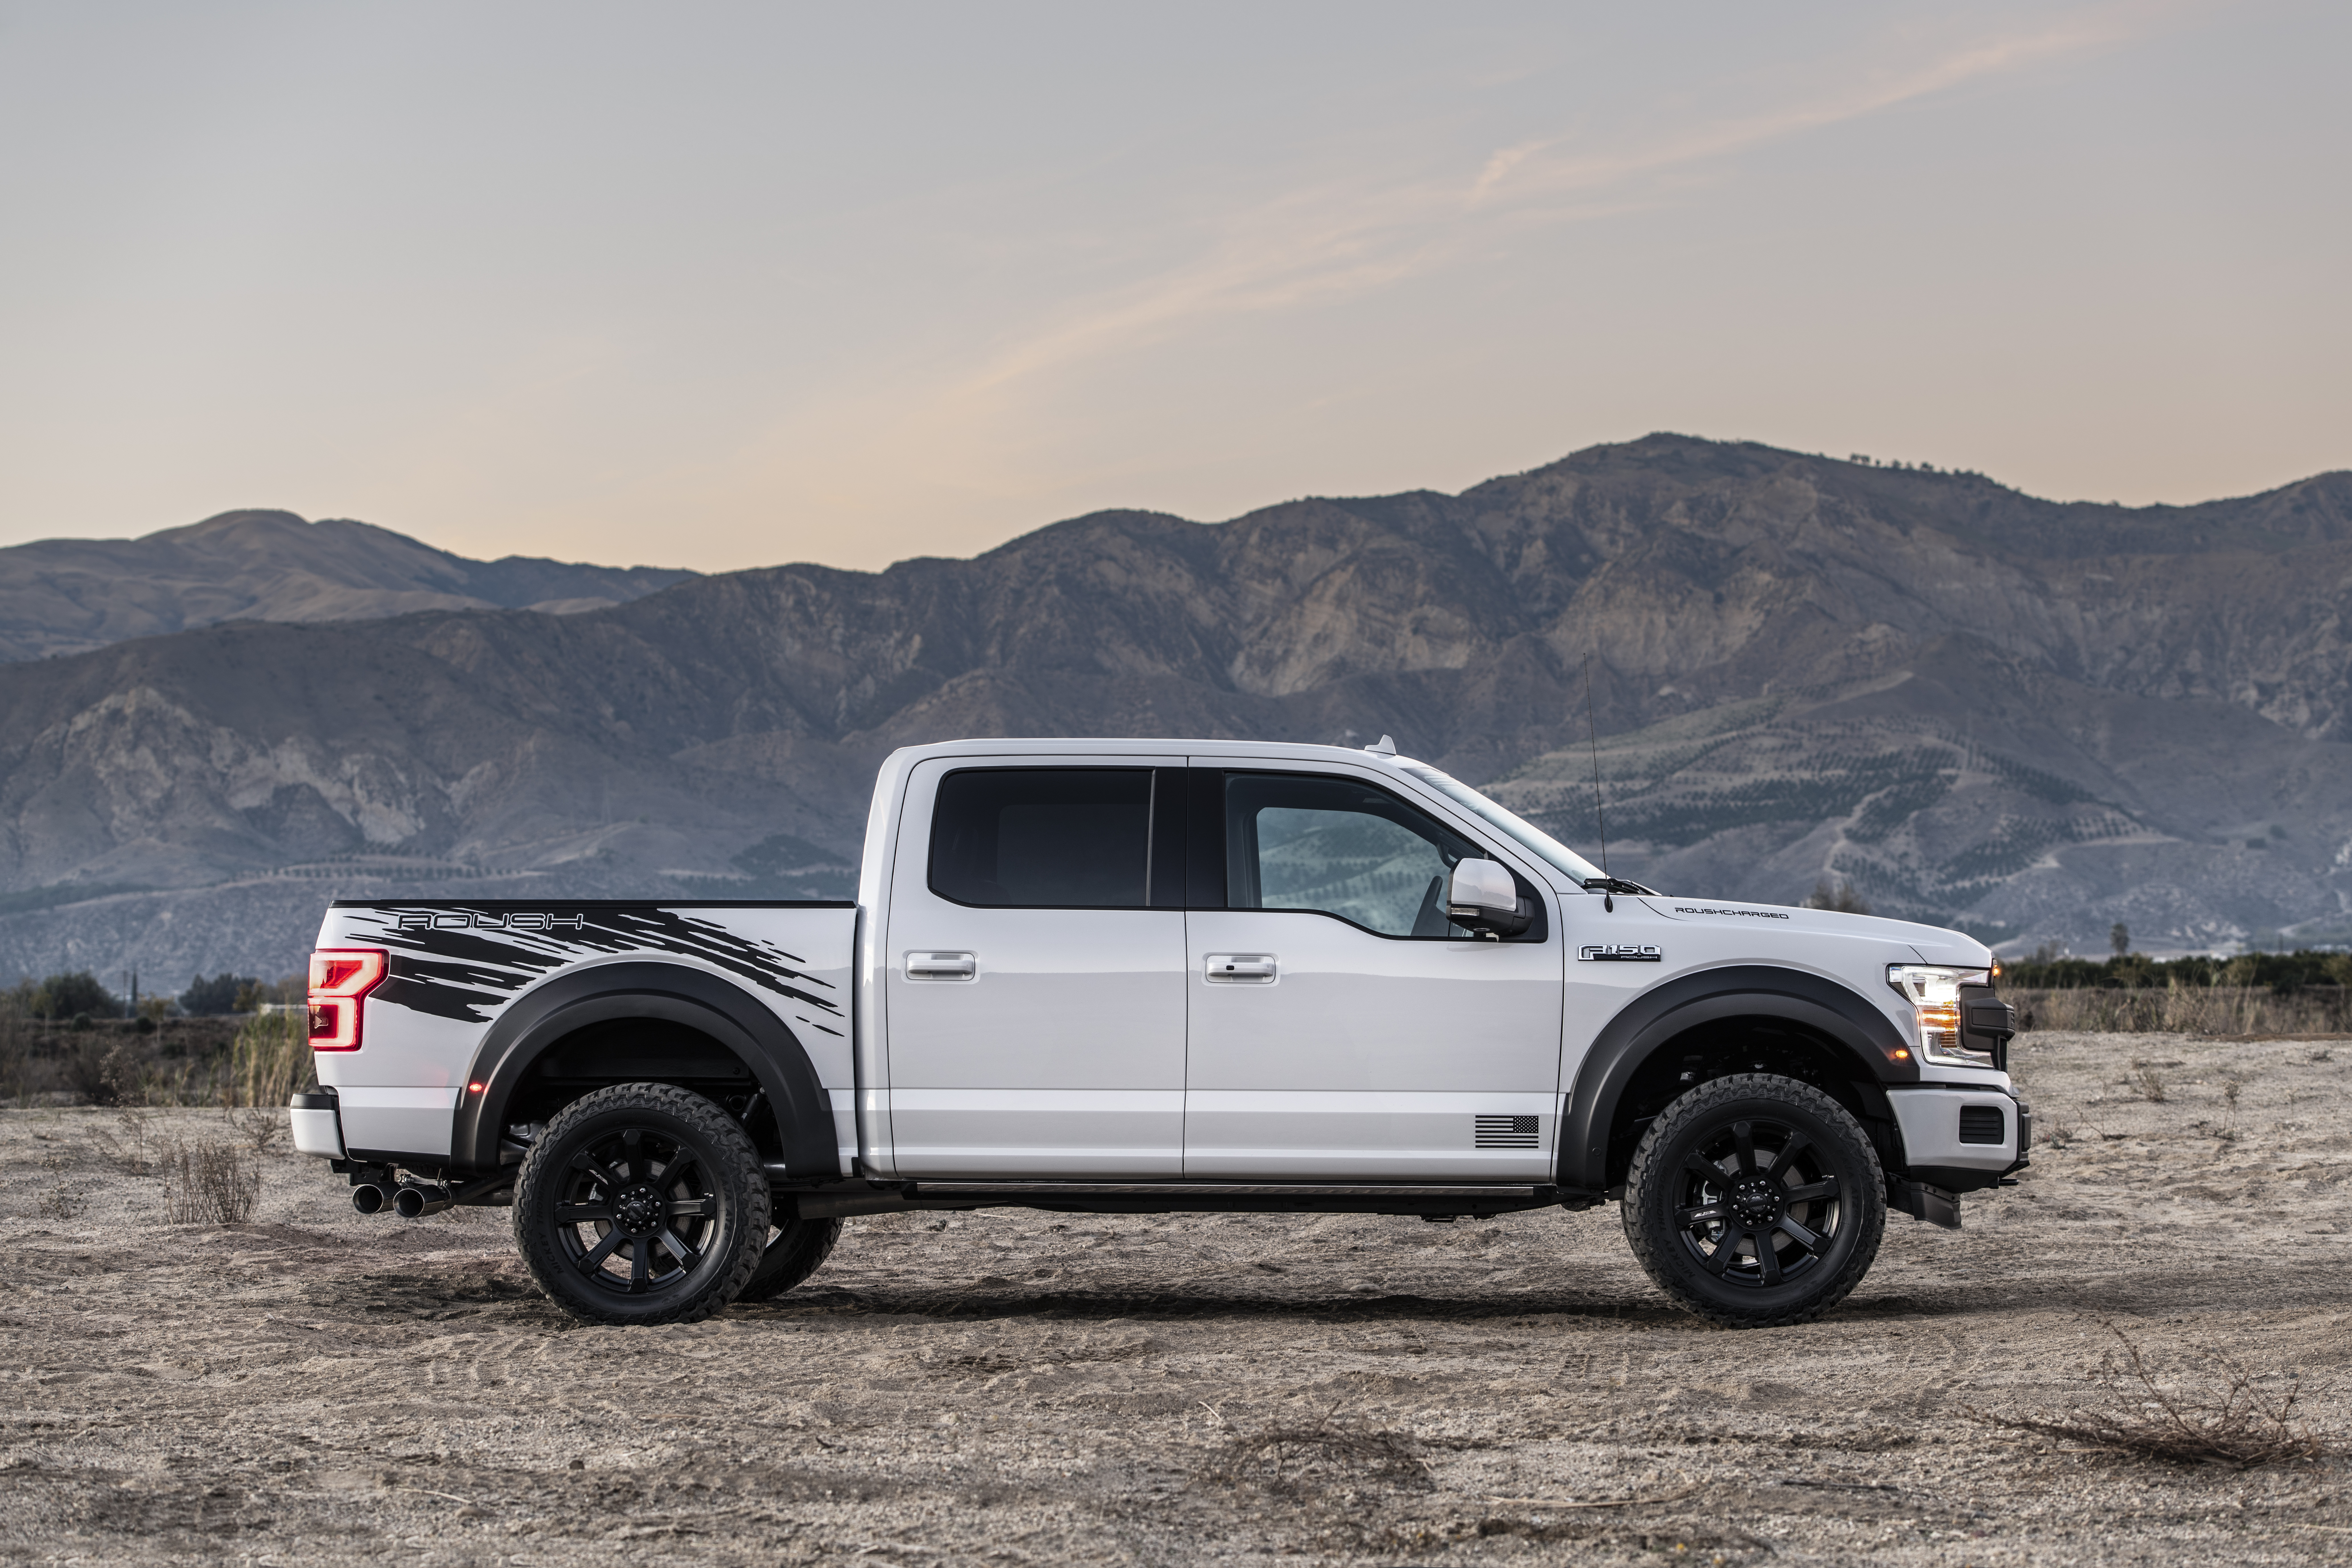 Roush F-150 SC, 2018 Roush F-150 SC is the truck promised in all those commercials, ClassicCars.com Journal